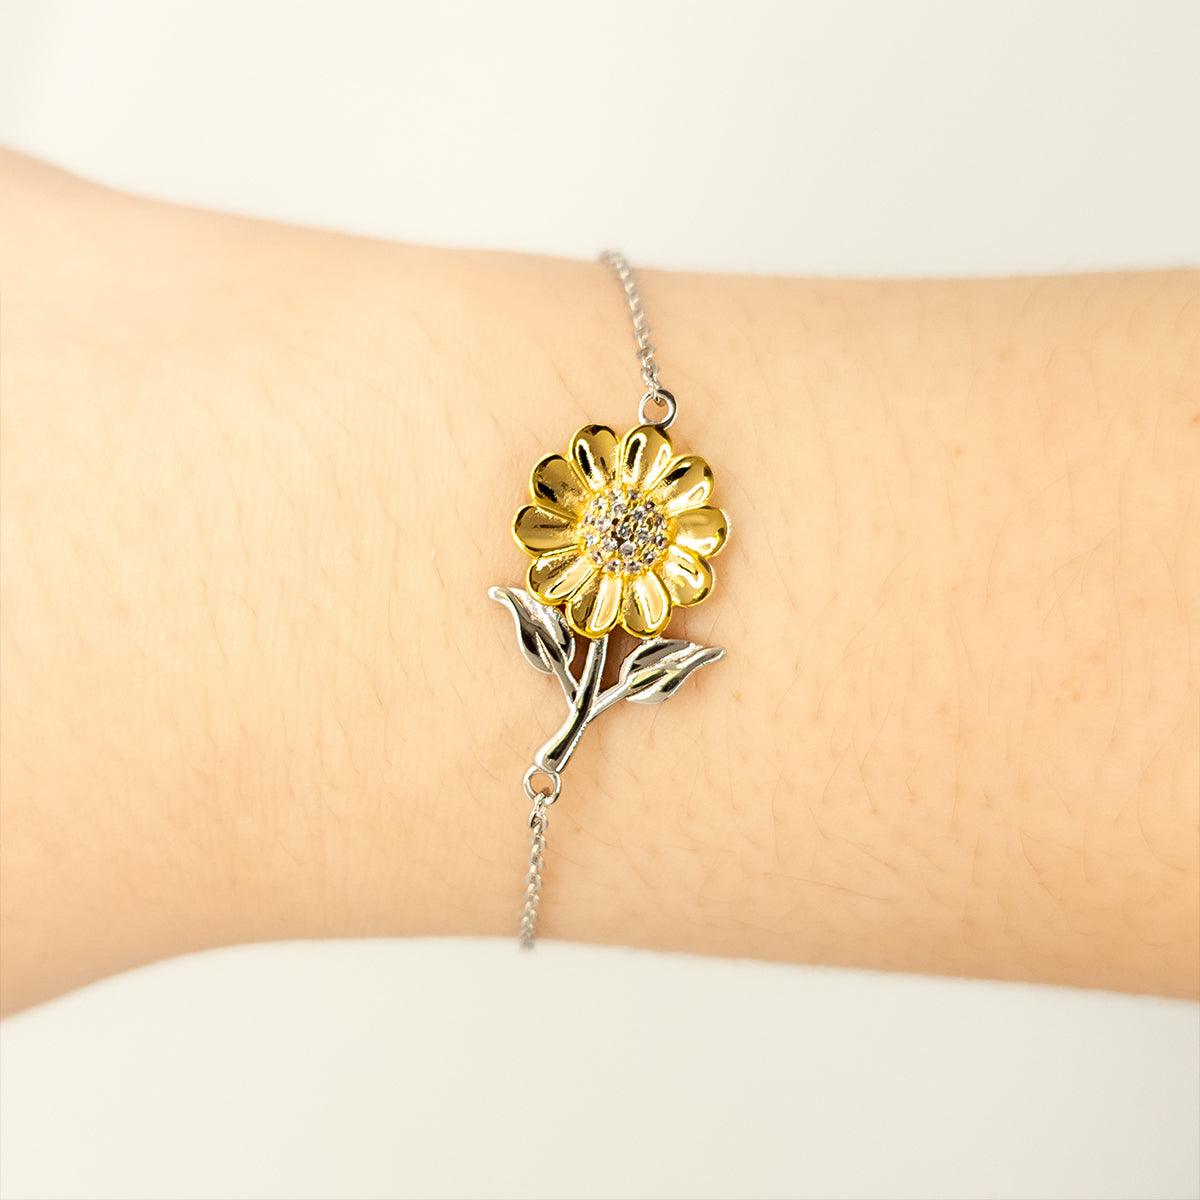 Office Clerk Sunflower Bracelet - Thanks for being who you are - Birthday Christmas Jewelry Gifts Coworkers Colleague Boss - Mallard Moon Gift Shop